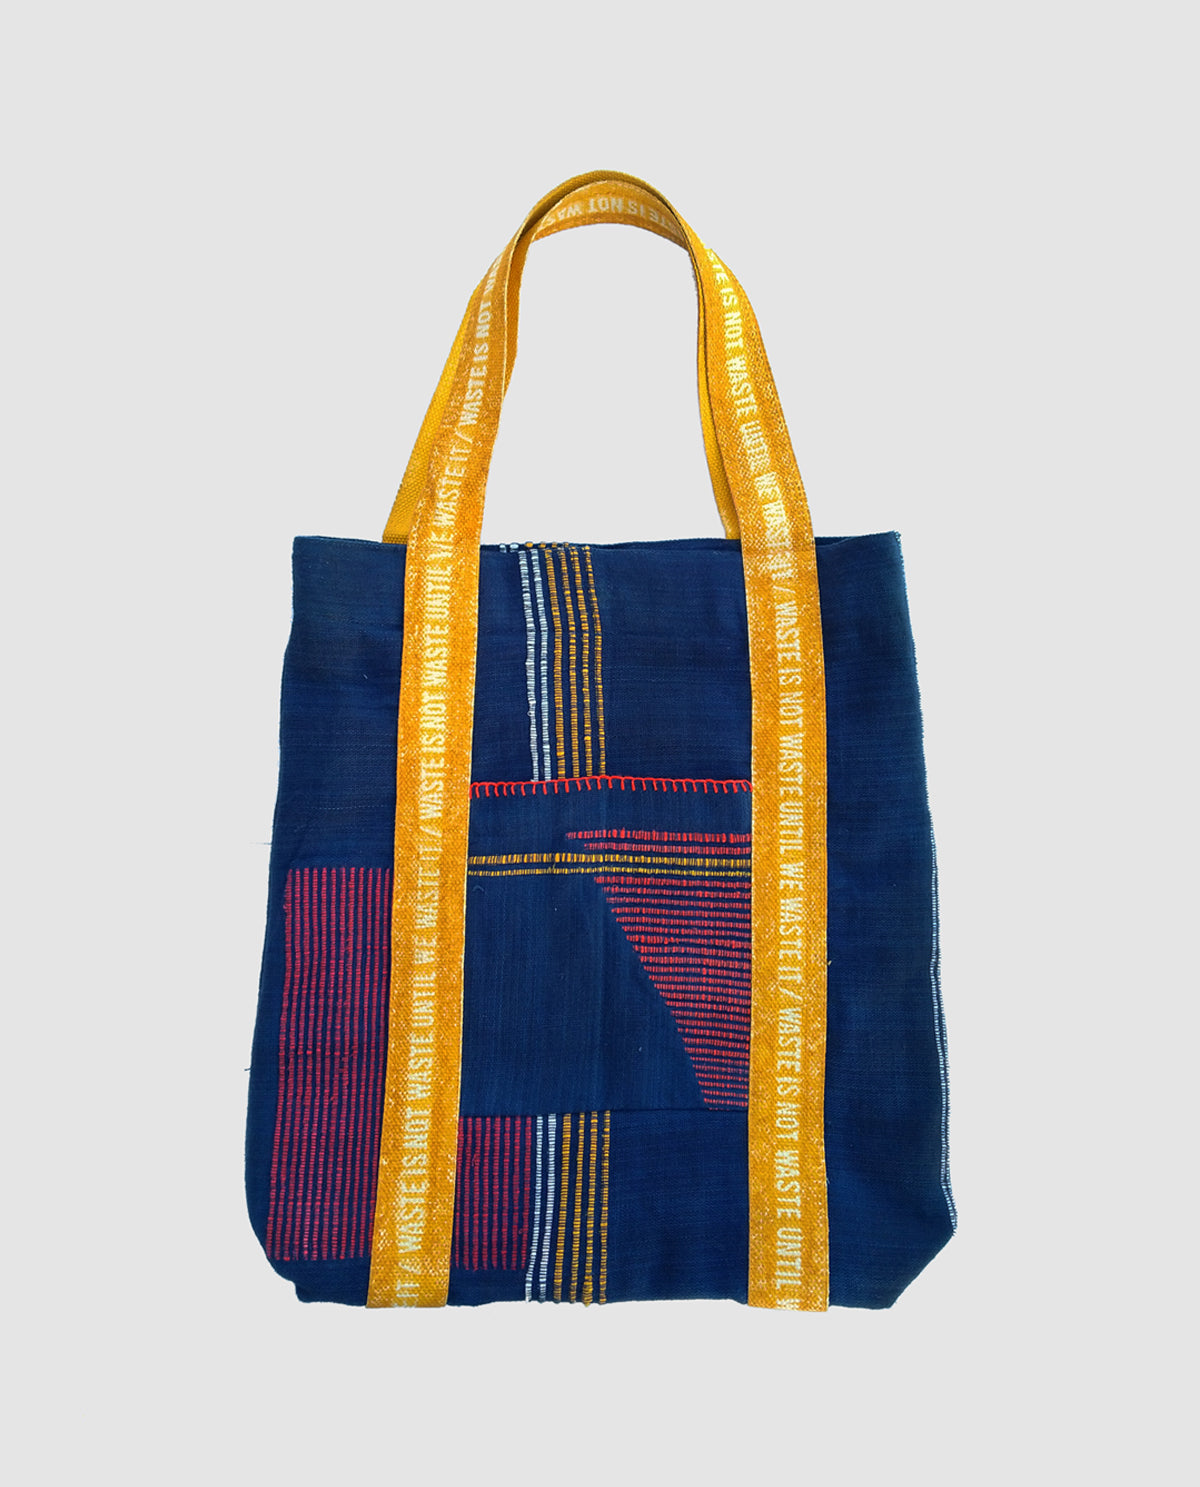 A blue handwoven shoulder bag with a magnetic button closure and two fabric handles.